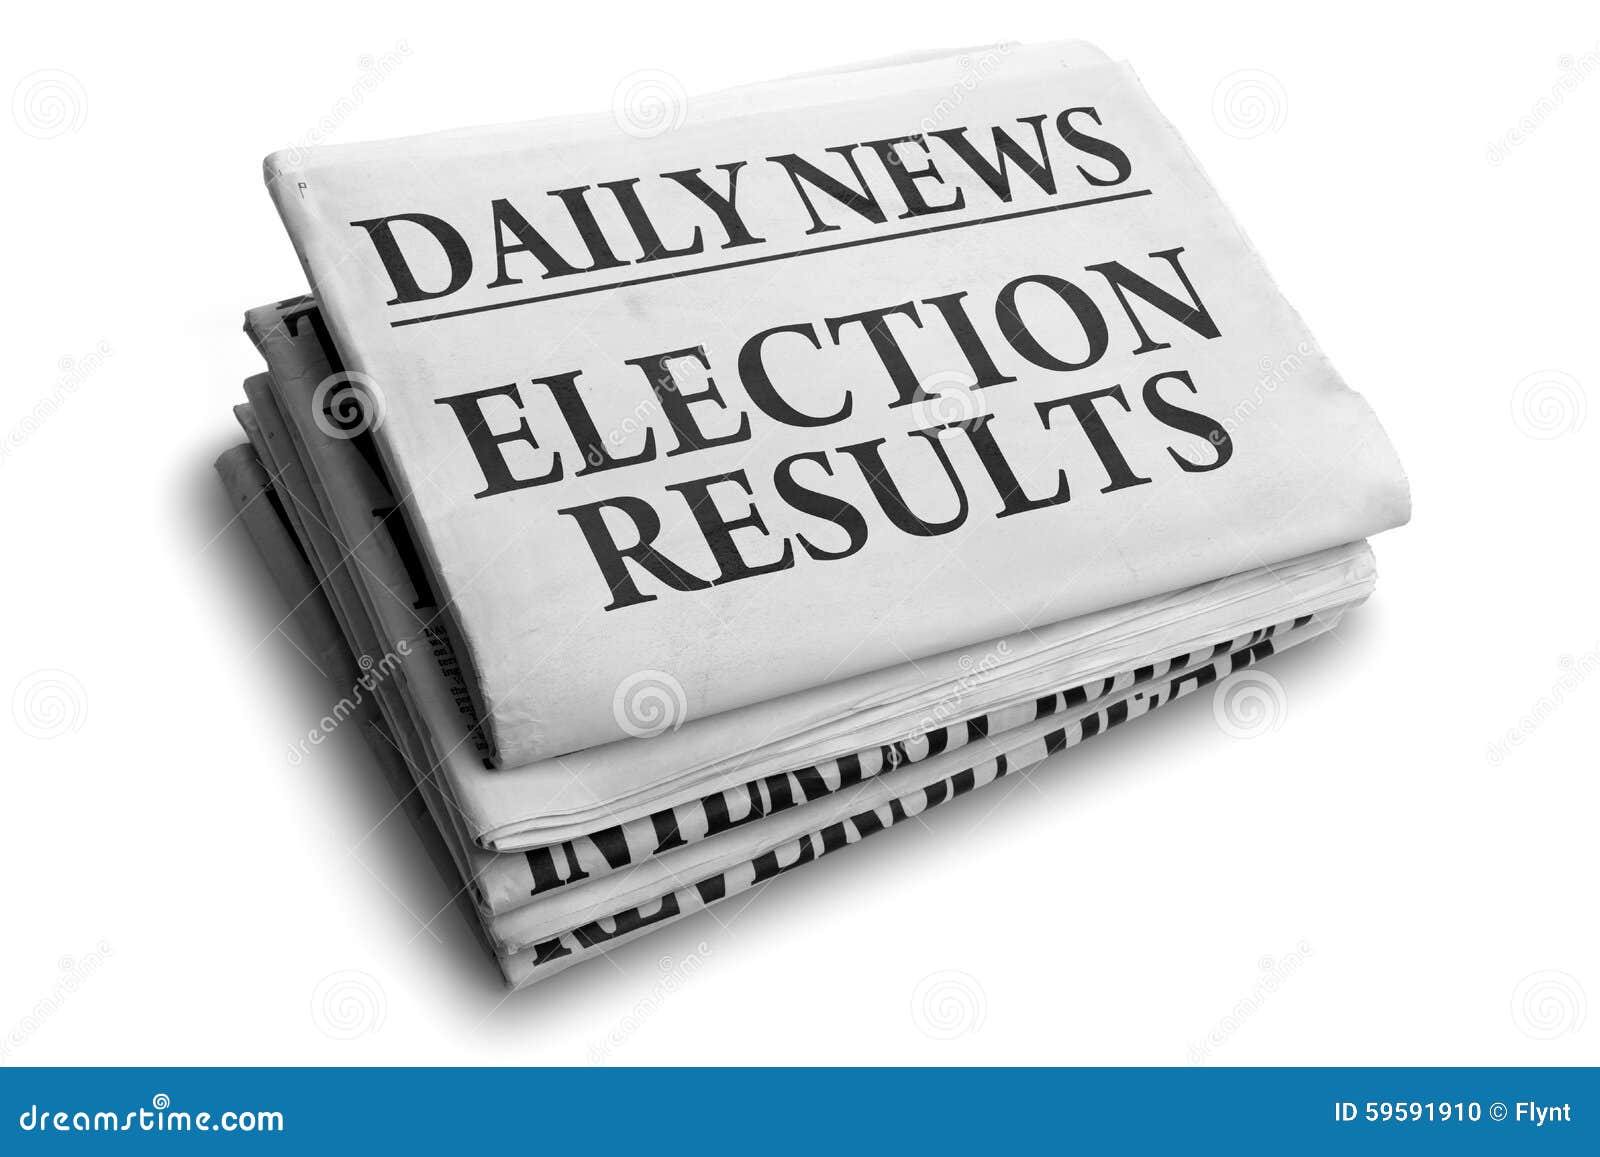 election results daily newspaper headline